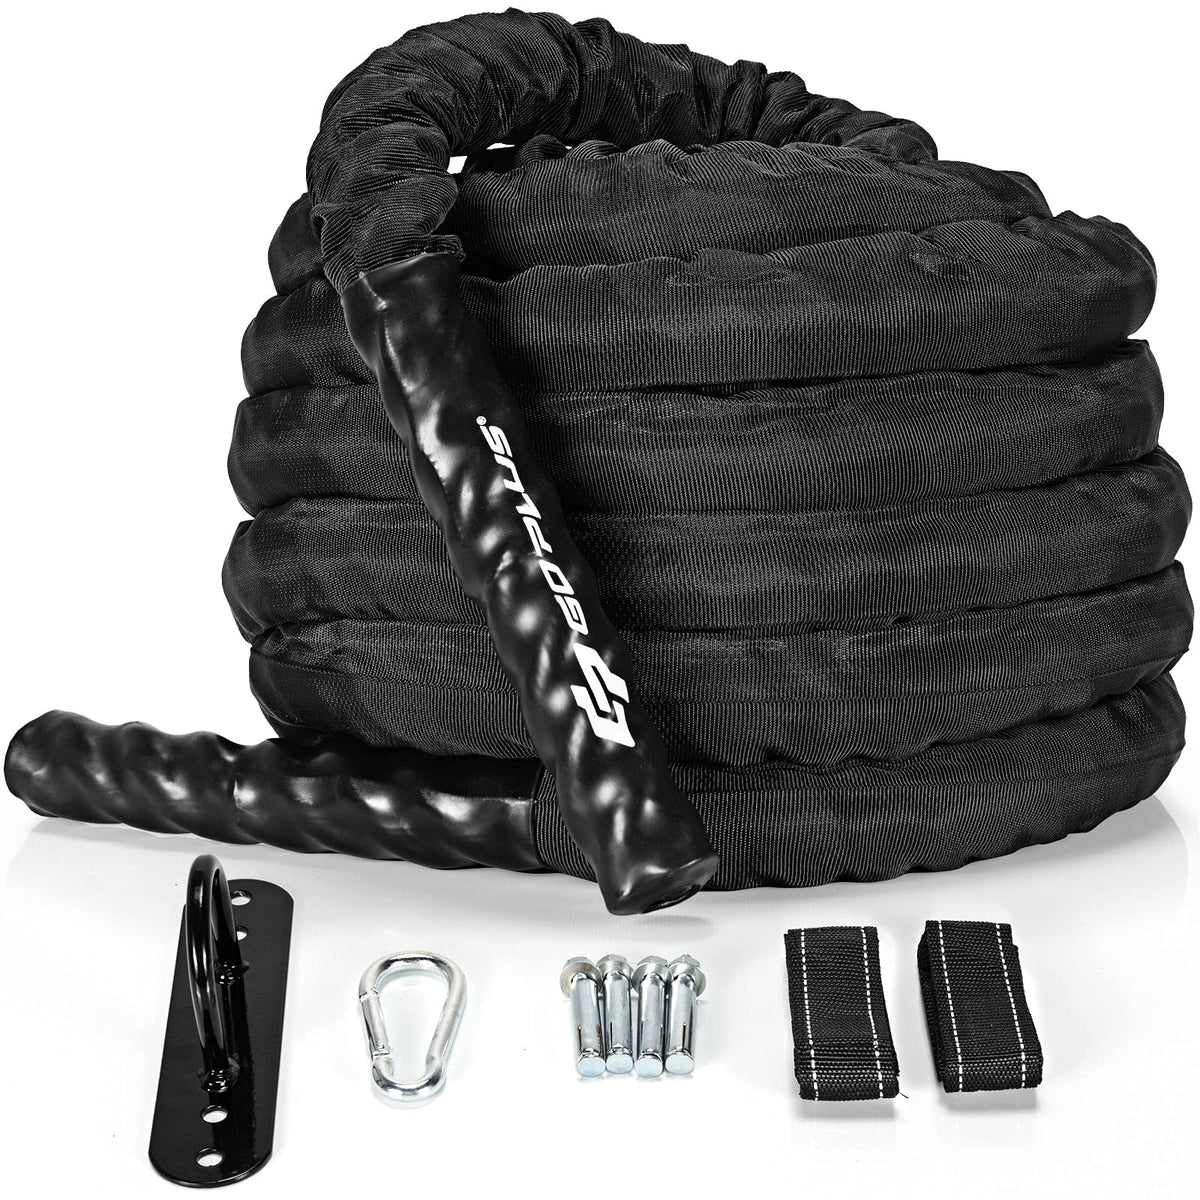 Battle Rope with Protective Sleeve 30' 40' 50' Lengths Exercise Rope - GoplusUS